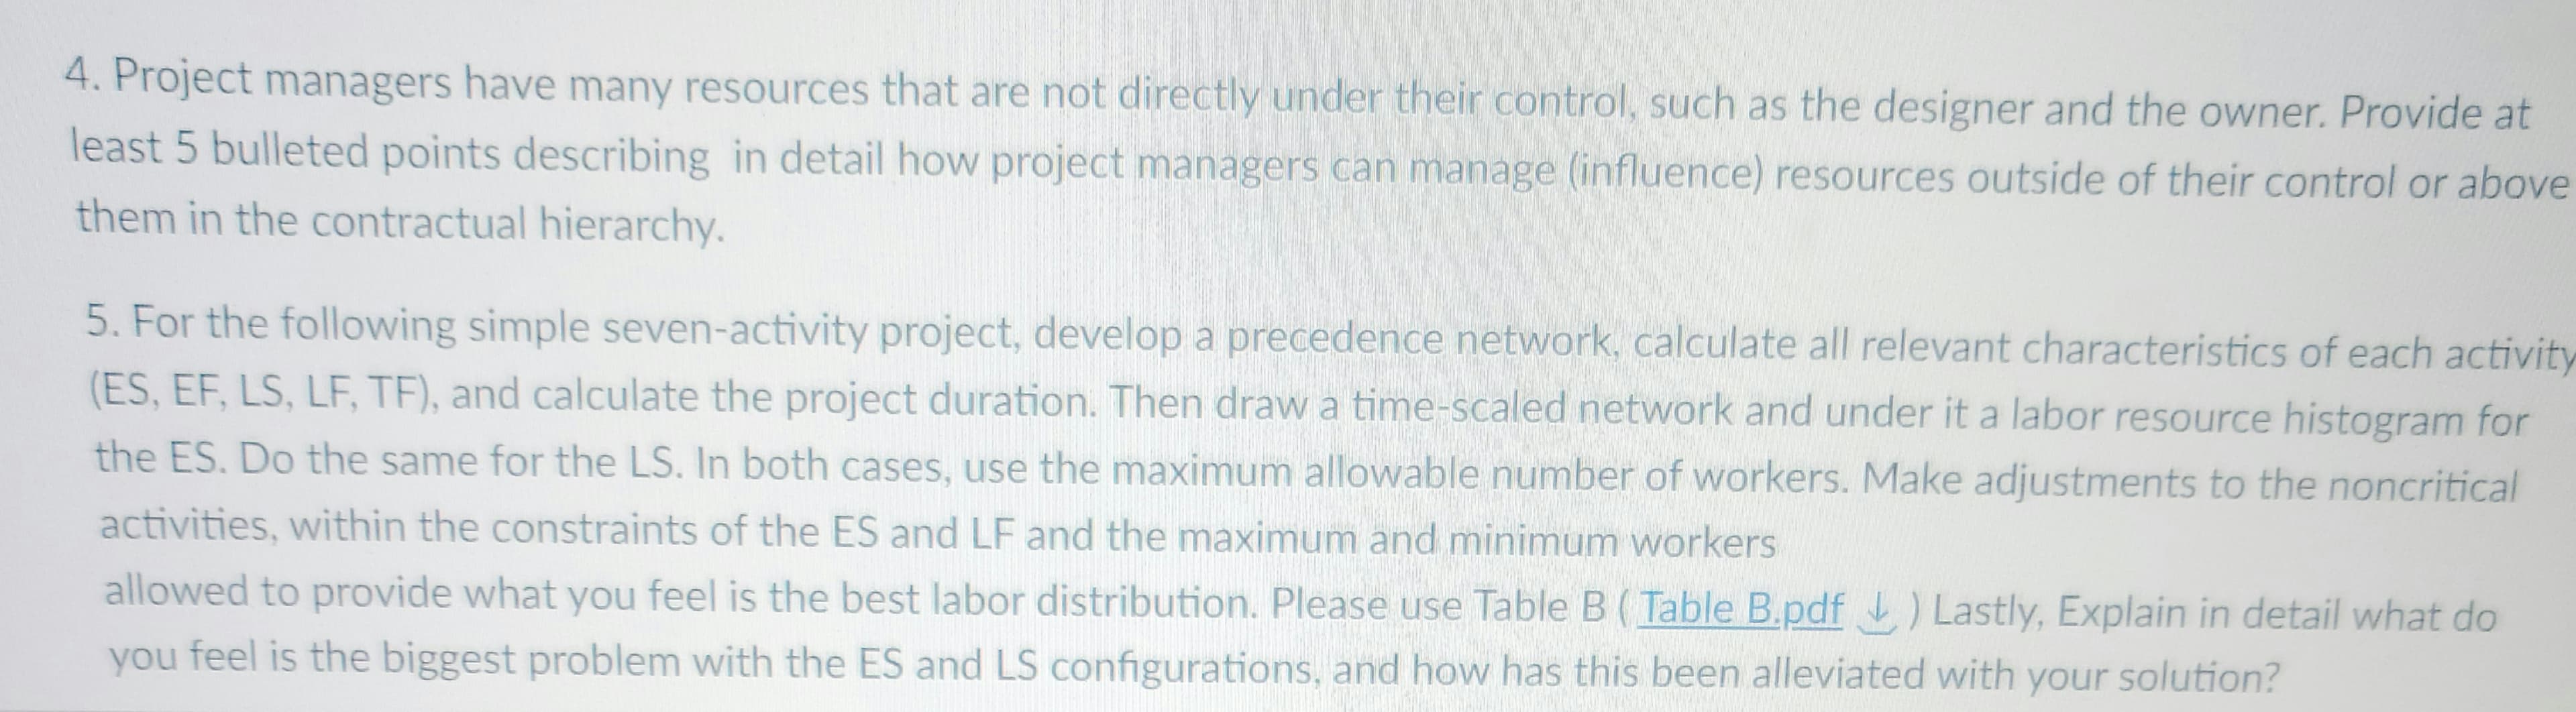 4. Project managers have many resources that are not directly under their control, such as the designer and the owner. Provide at
least 5 bulleted points describing in detail how project managers can manage (influence) resources outside of their control or above
them in the contractual hierarchy.
5. For the following simple seven-activity project, develop a precedence network, calculate all relevant characteristics of each activity
(ES, EF, LS, LF, TF), and calculate the project duration. Then draw a time-scaled network and under it a labor resource histogram for
the ES. Do the same for the LS. In both cases, use the maximum allowable number of workers. Make adjustments to the noncritical
activities, within the constraints of the ES and LF and the maximum and minimum workers
allowed to provide what you feel is the best labor distribution. Please use Table B (Table B.pdf) Lastly, Explain in detail what do
you feel is the biggest problem with the ES and LS configurations, and how has this been alleviated with your solution?